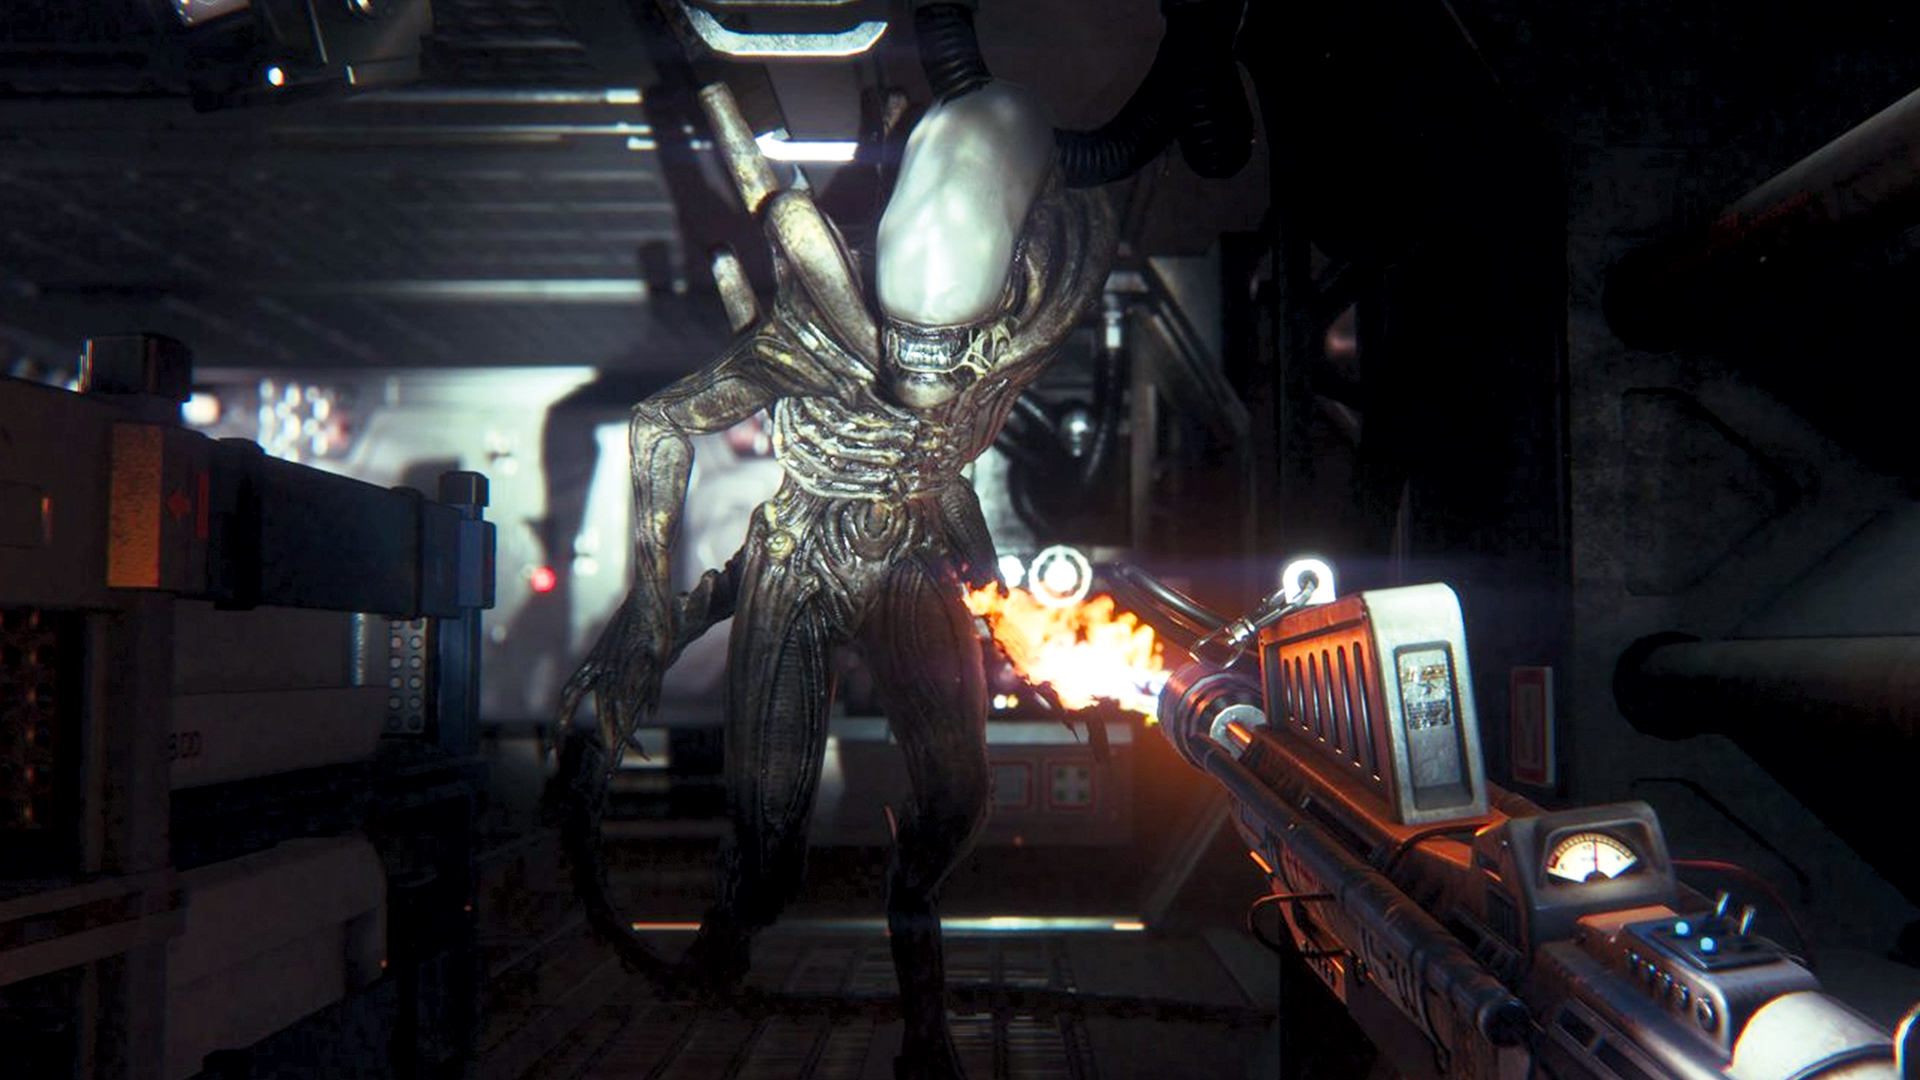 best horror games – First-person view of the player shooting at the Alien in Alien: Isolation